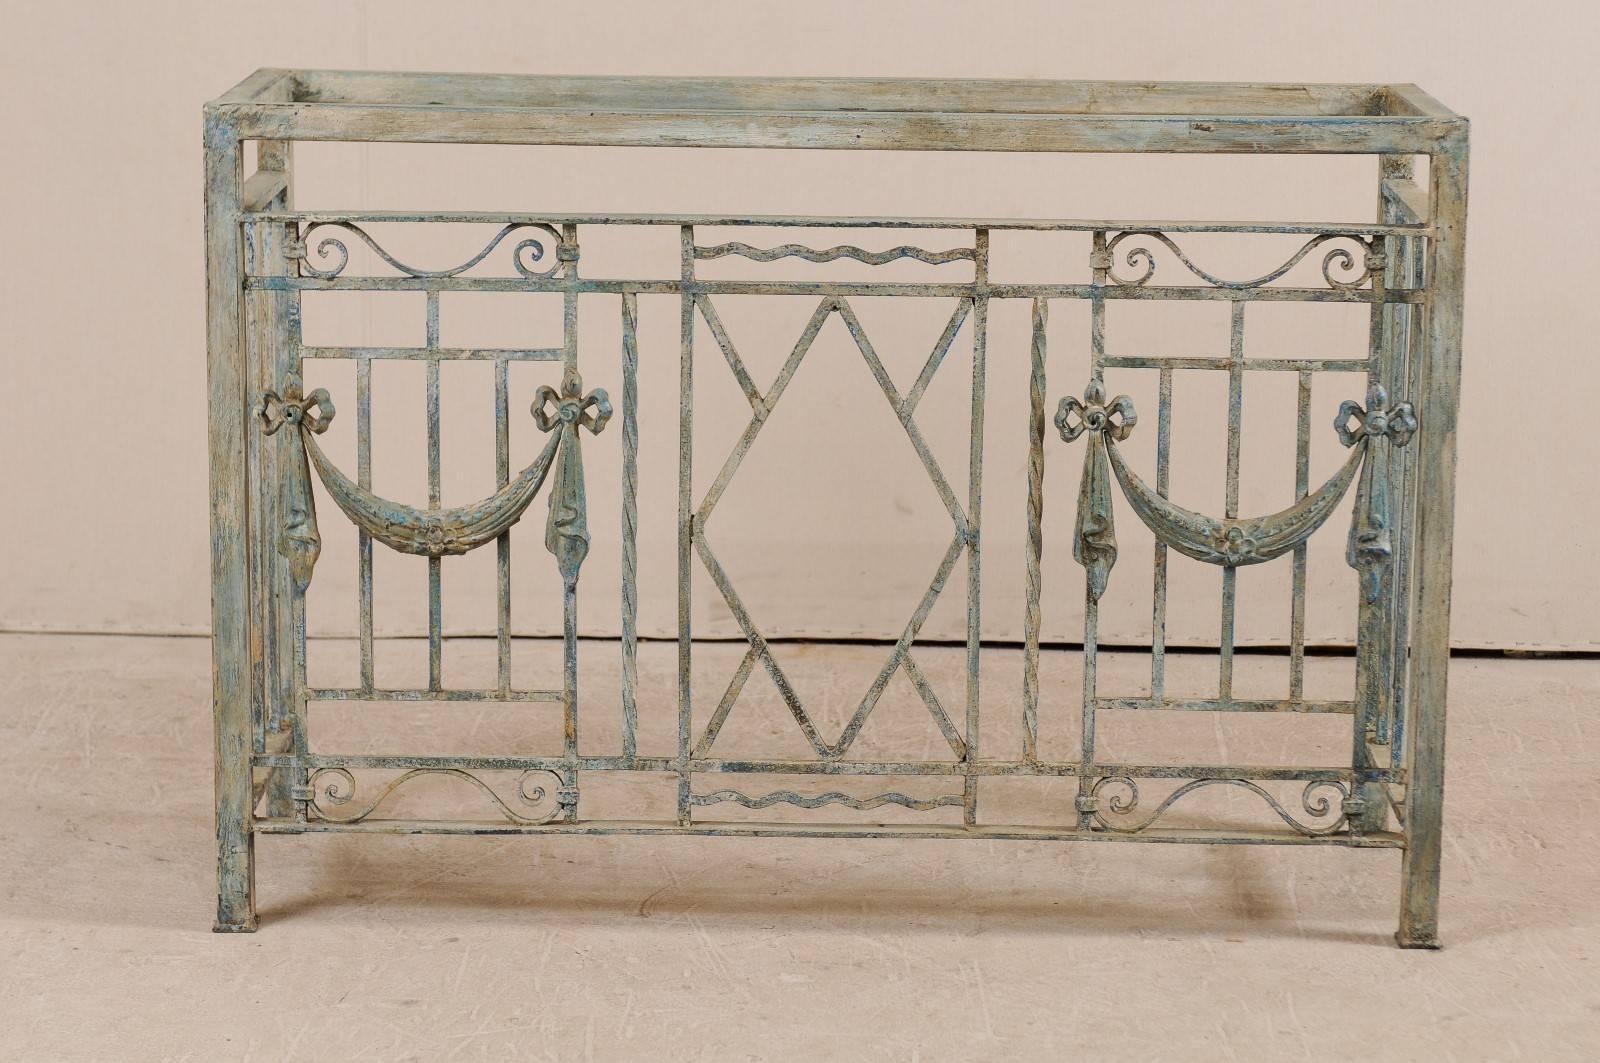 A pair of 19th century French painted iron console table bases. This pair of iron consoles are actually old French balcony grates that have been re-purposed into a pair of console bases. Each console features a series of linear bars with the